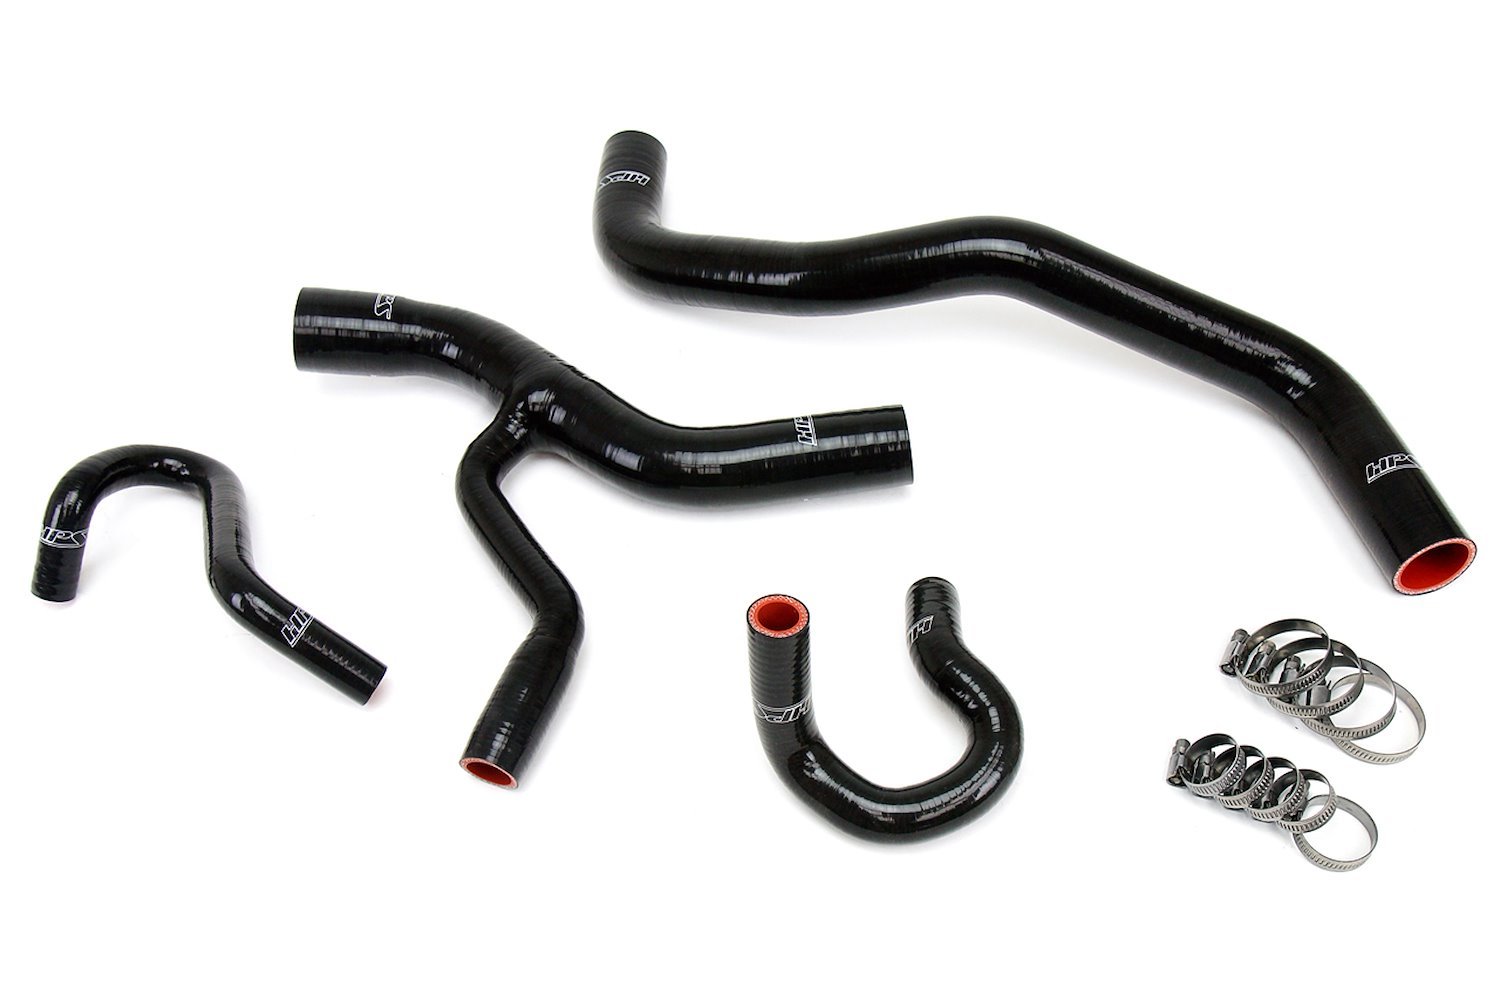 57-1416-BLK Coolant Hose Kit, High-Temp 3-Ply Reinforced Silicone, Replace Rubber Radiator Heater Coolant Hoses